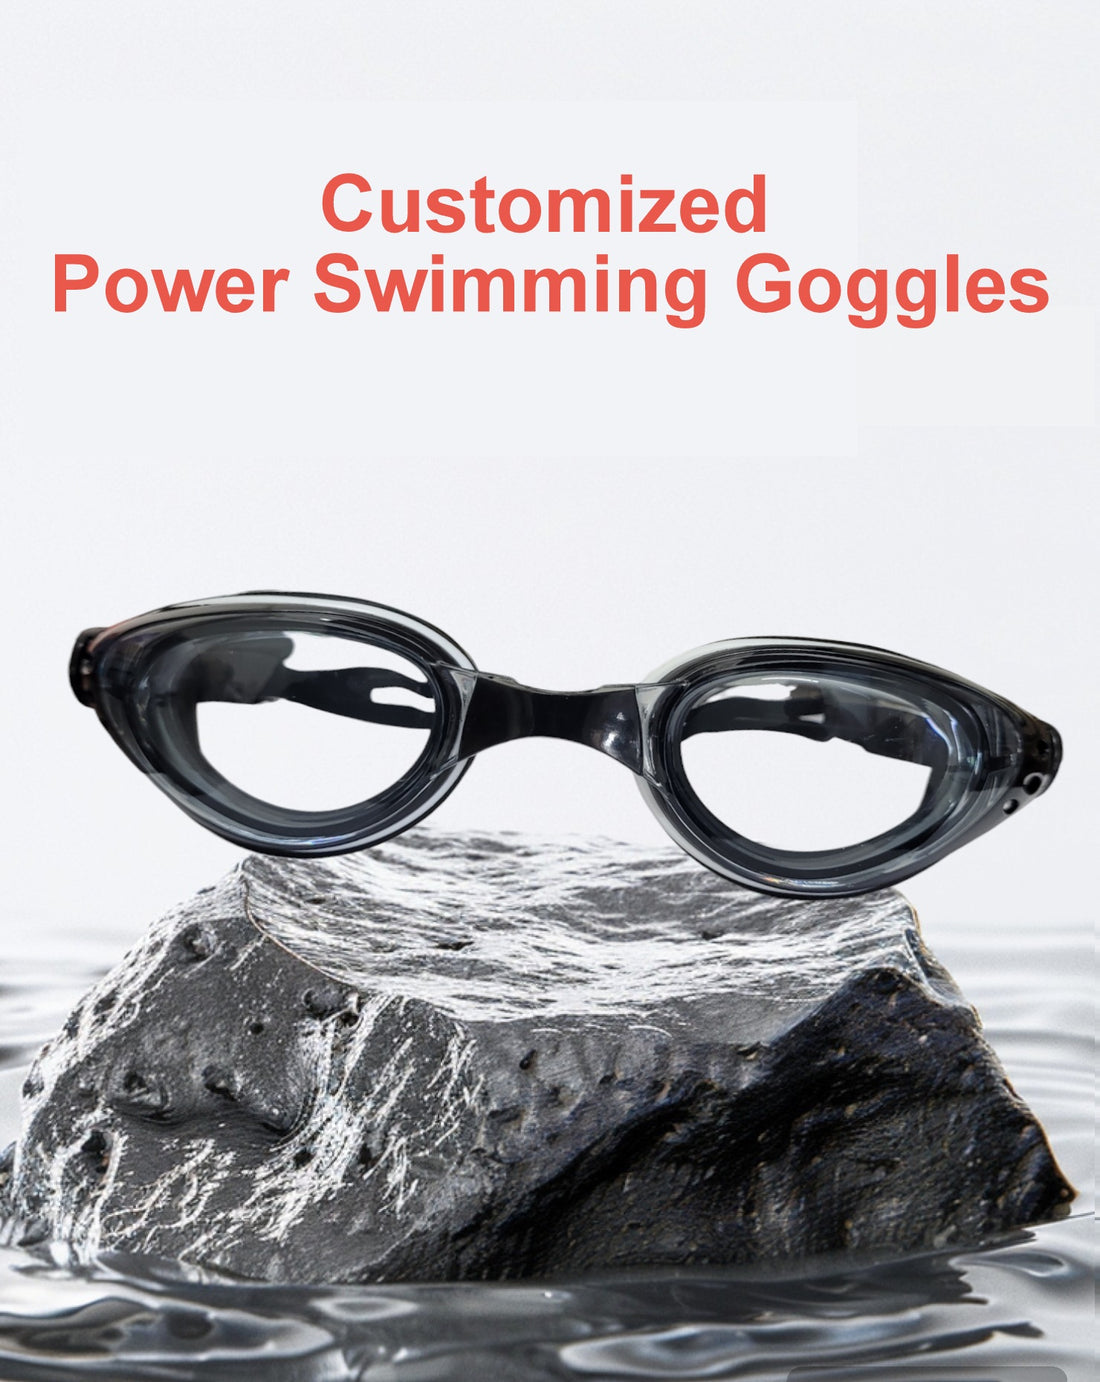 Customized Power Swimming Goggles Rx Prescription Optical Corrective Lenses with UV Protection available at www.SoftTouchLenses.com